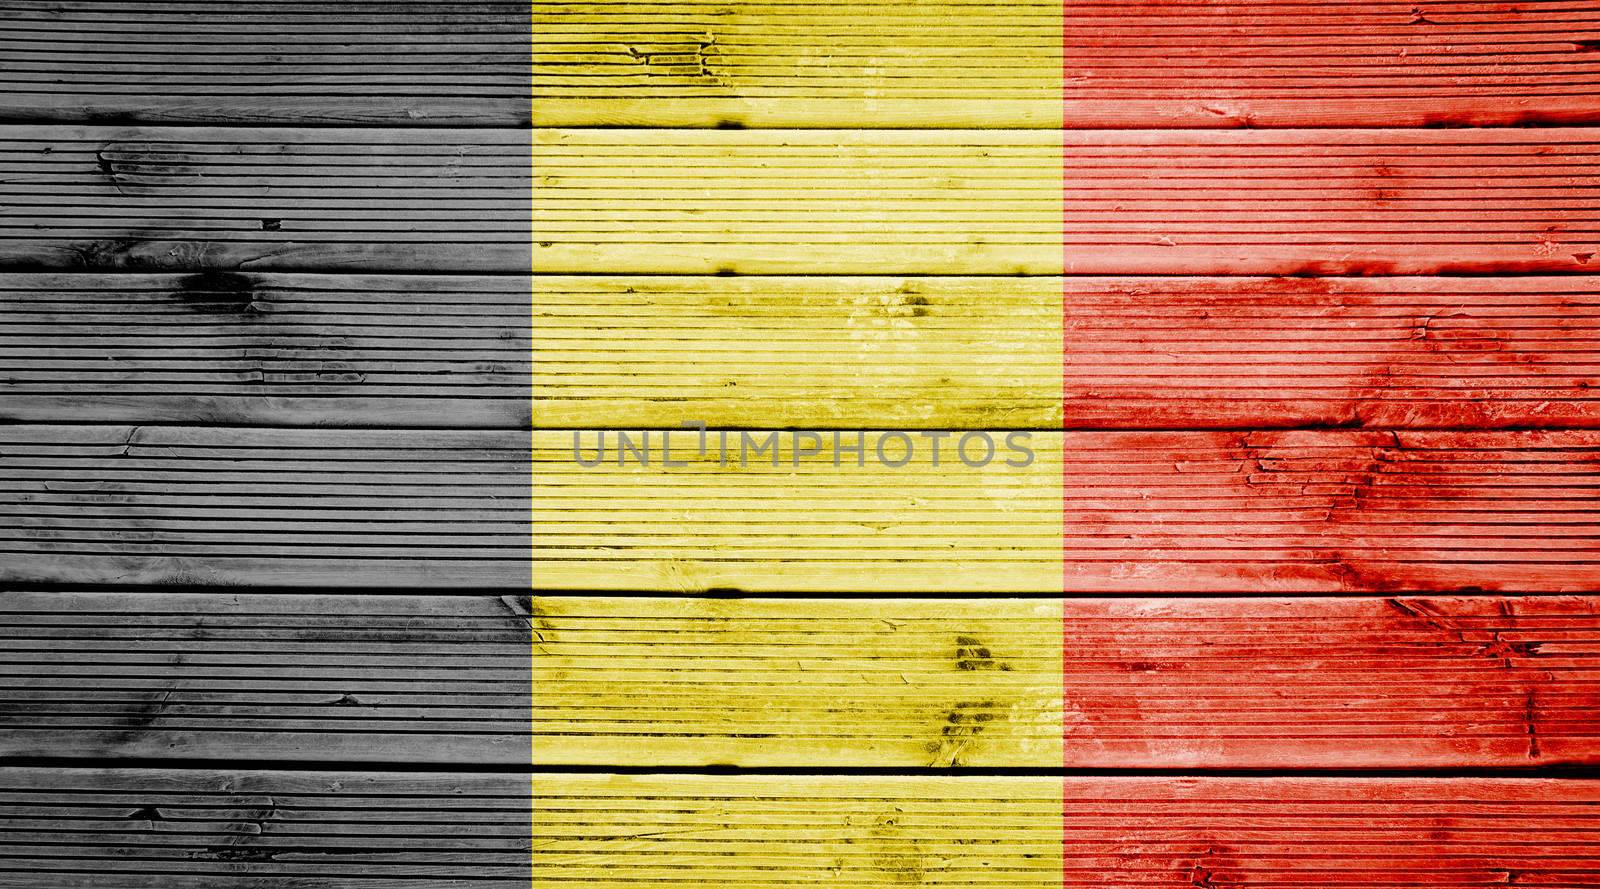 Wood texture background with colors of the flag of Belgium by doble.d